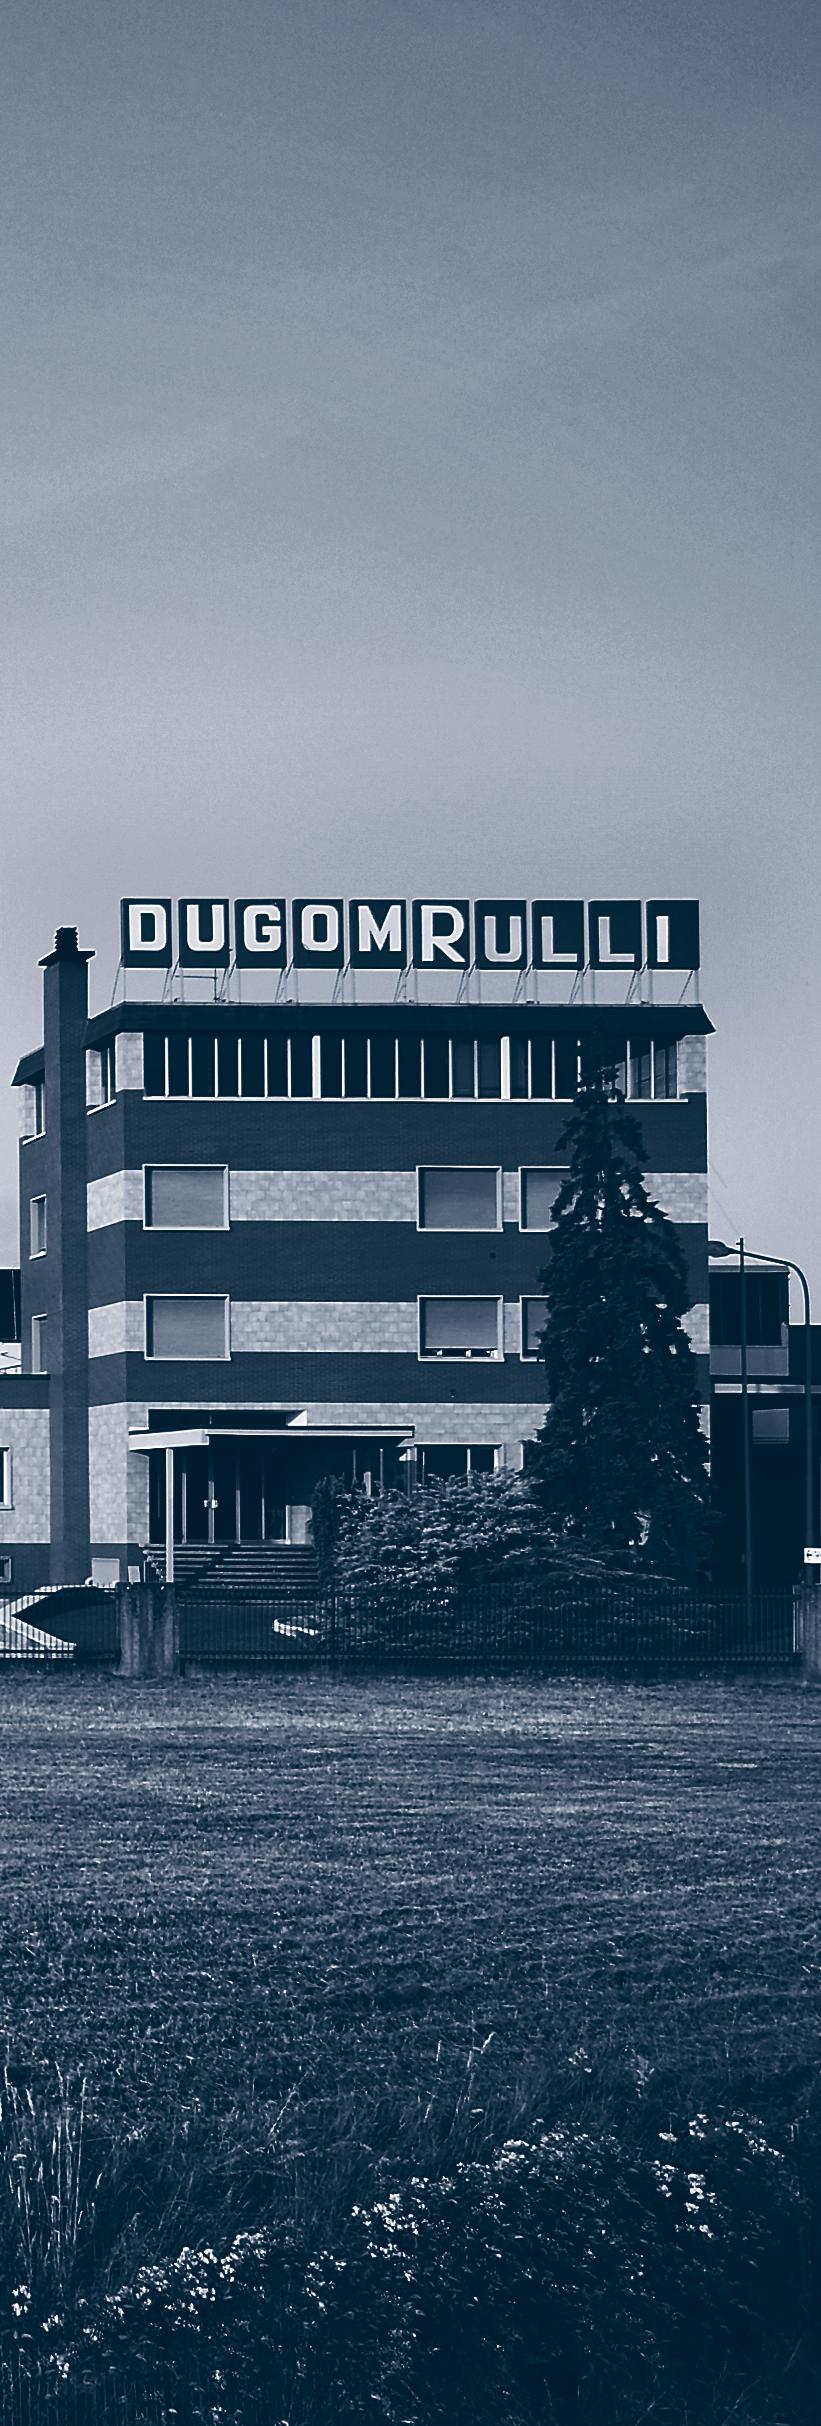 DUGOMRULLI HISTORY The past, present and future of materials handling From its first facilities, established back in 1938, to the current 17,000-square-meters productive area not far from Bologna